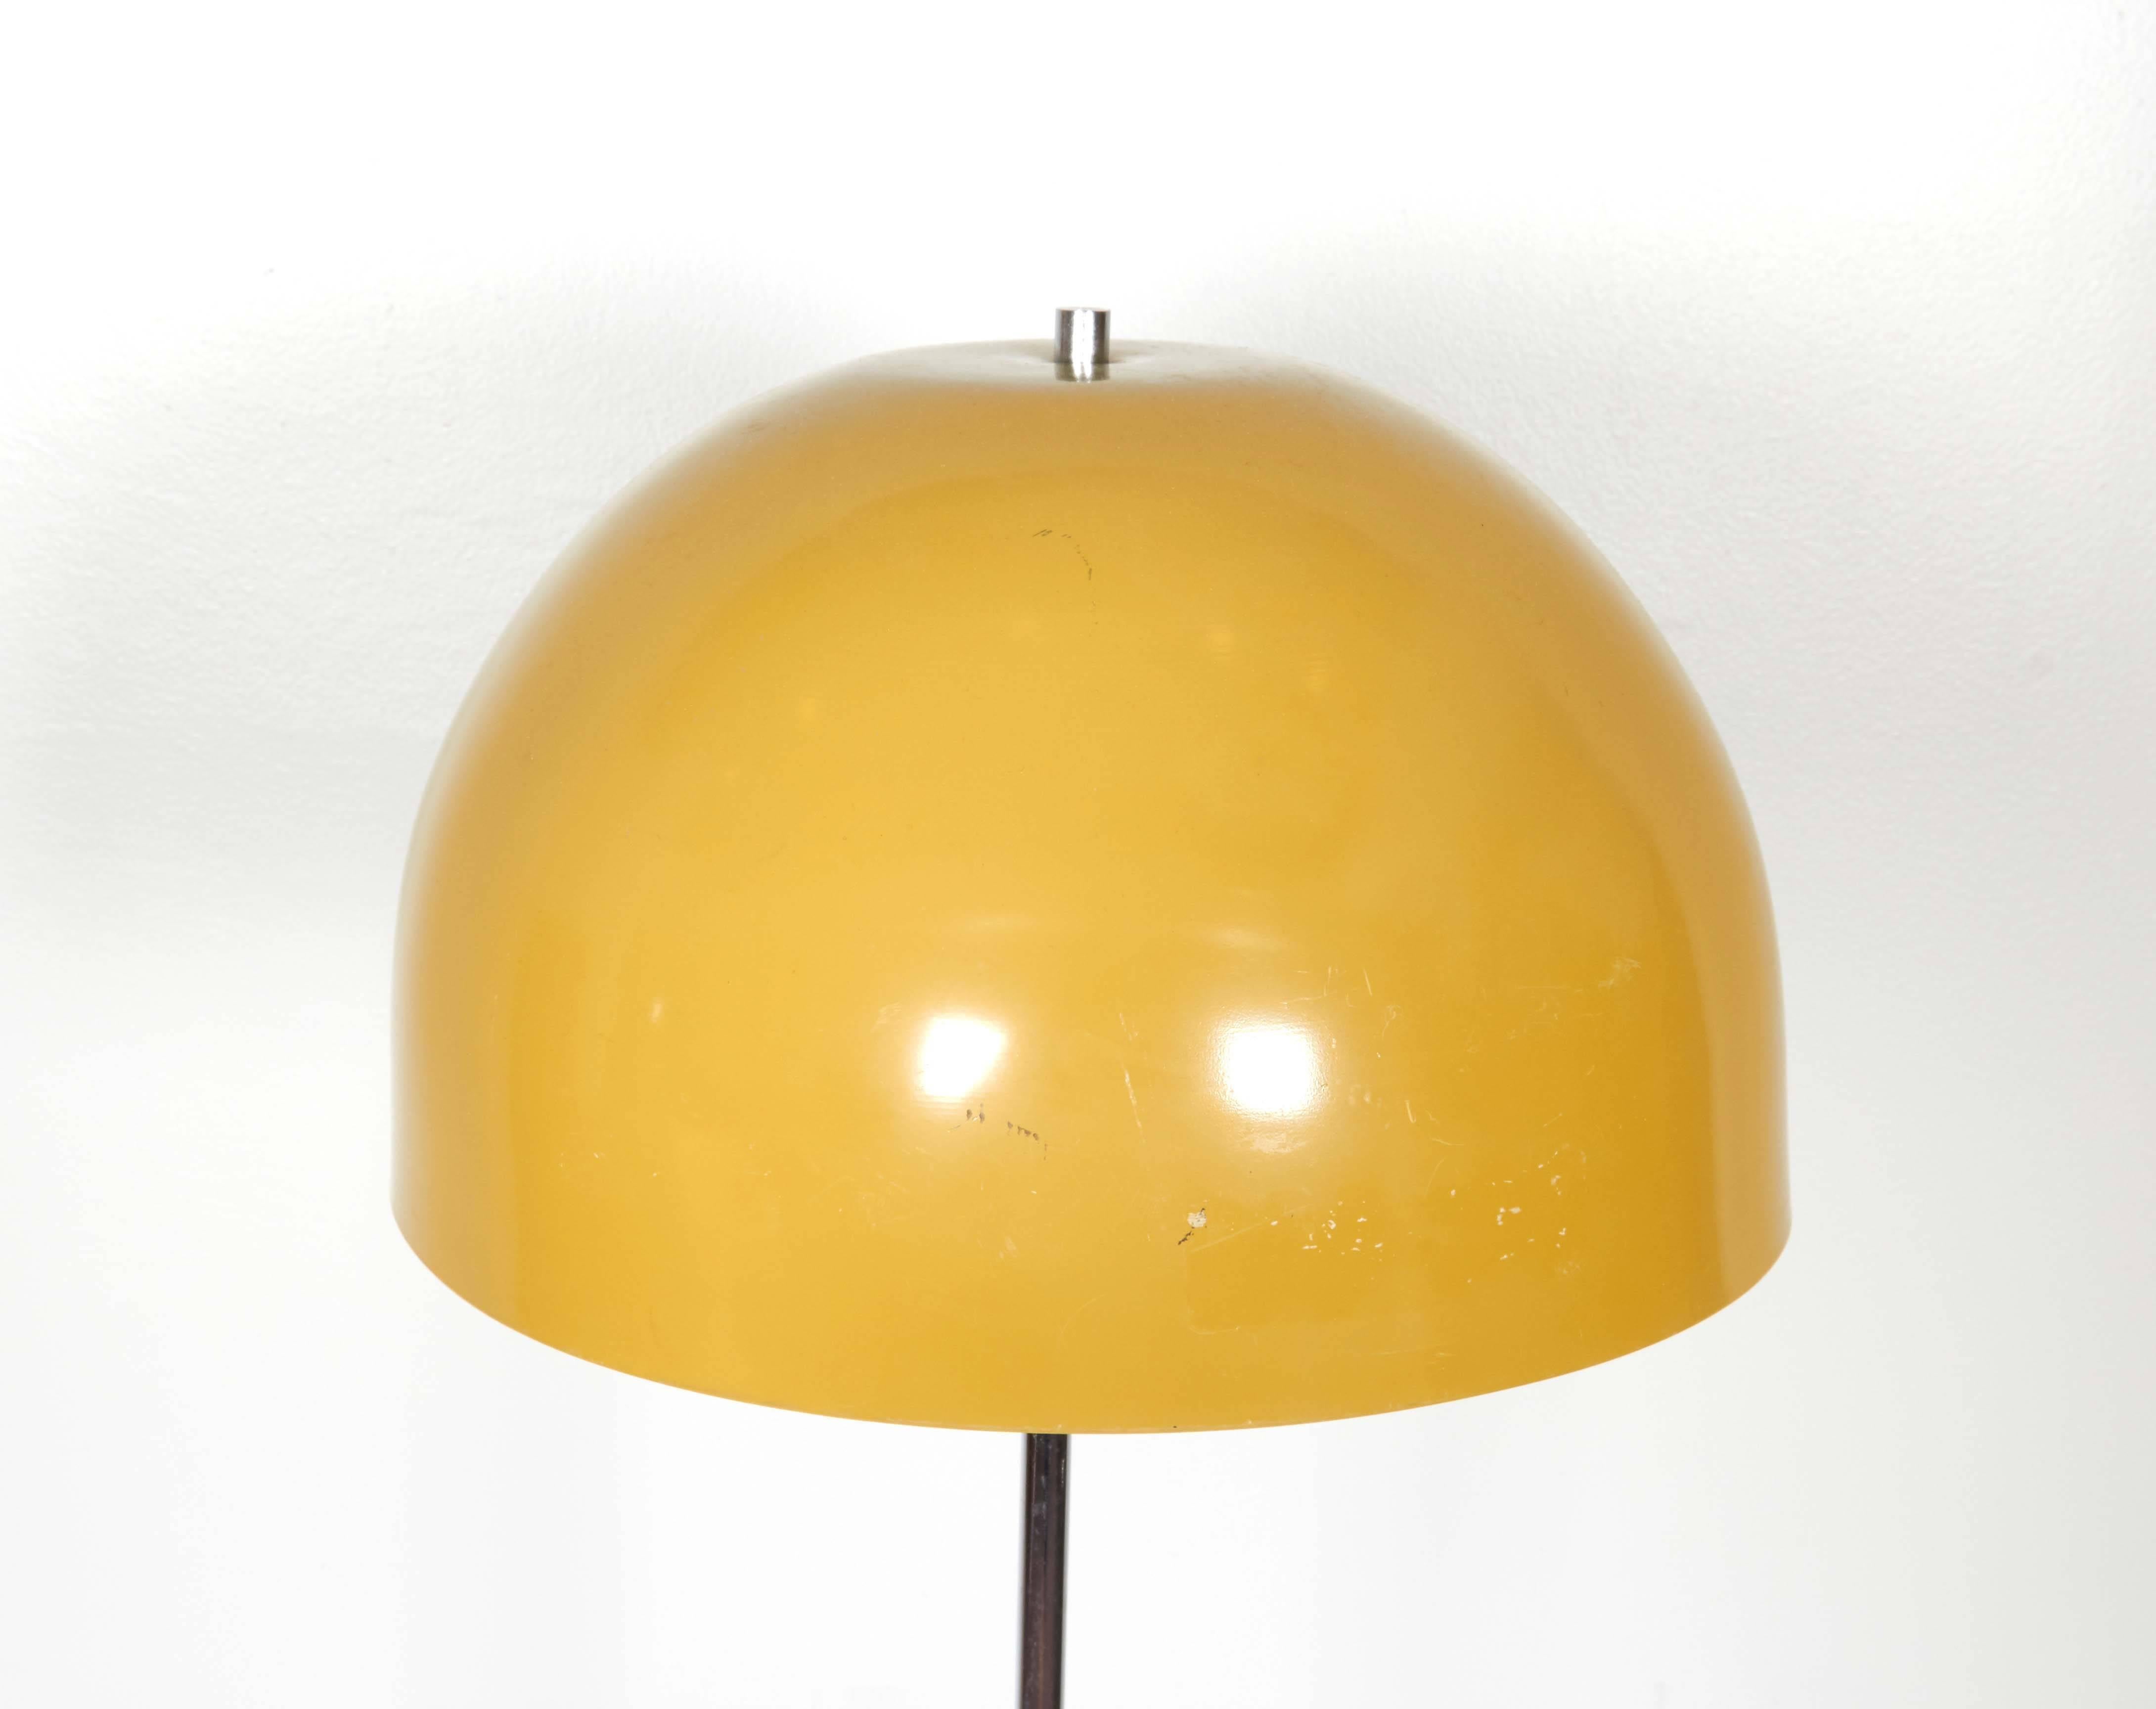 This circa 1960s floor lamp includes dome form shade in yellow enamel, surrounding two ceramic sockets, on metal stem and circular base. Requires two medium base bulbs. The lamp remains in good vintage condition, with age appropriate wear.

10384